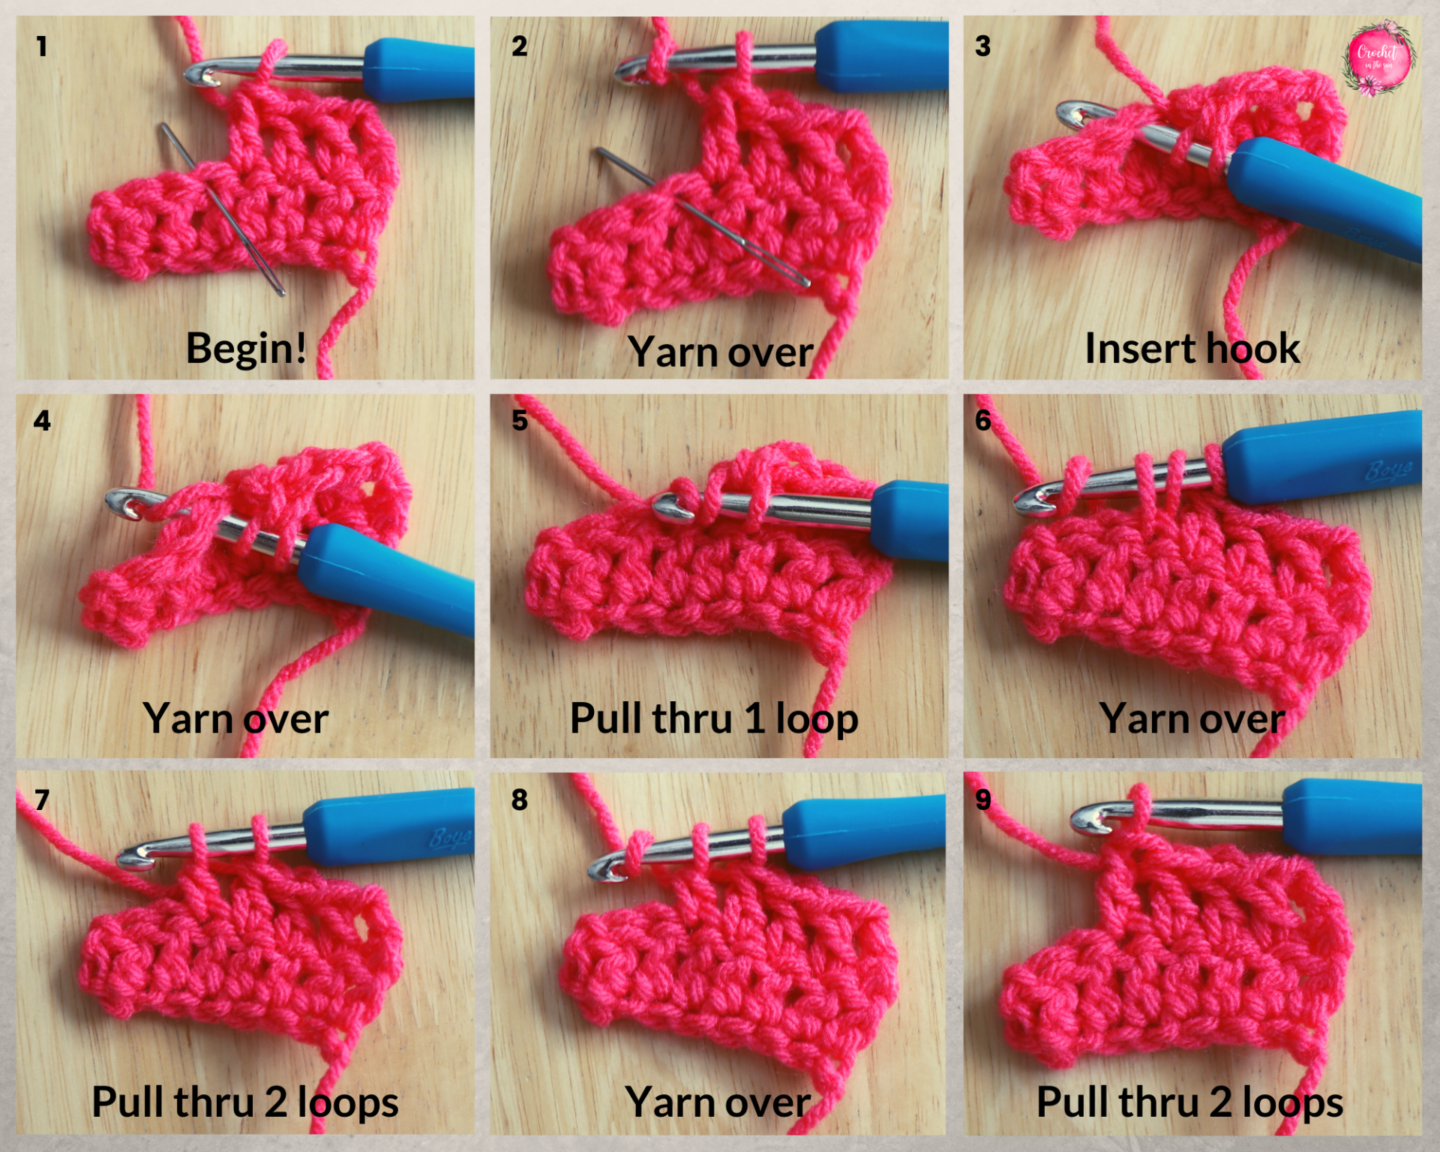 Learn Crochet: A Guide For Beginners To Teach Themselves